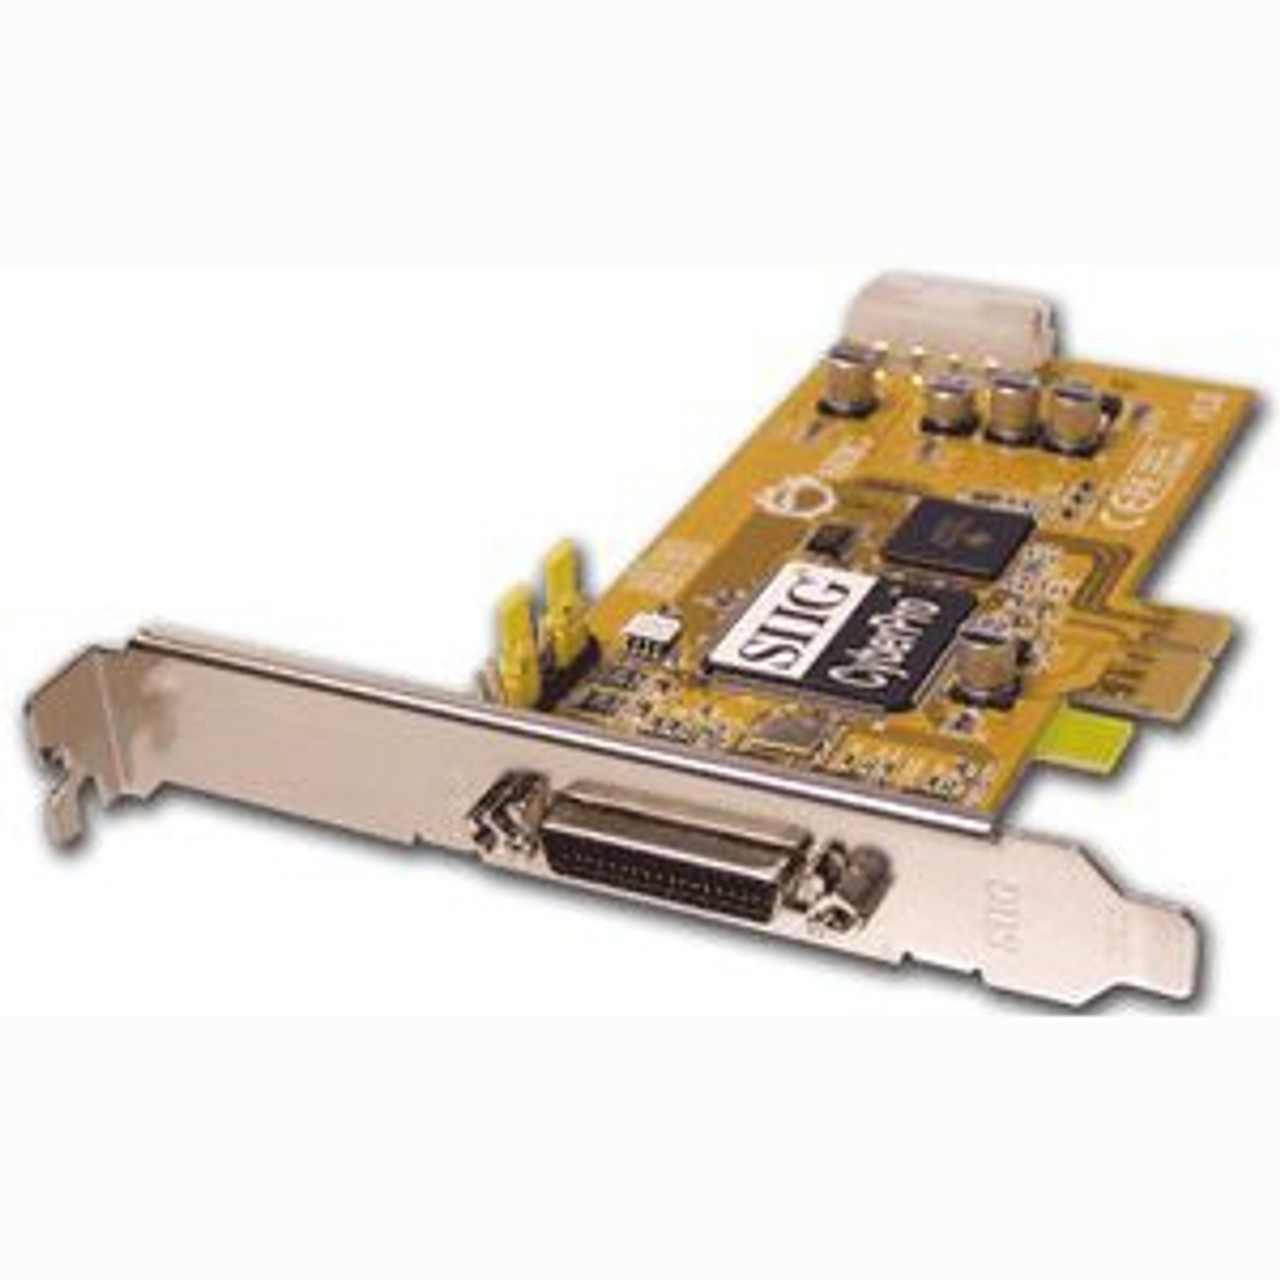 JJ-E40011-S1 SIIG CyberSerial 4S PCIe Serial Adapter